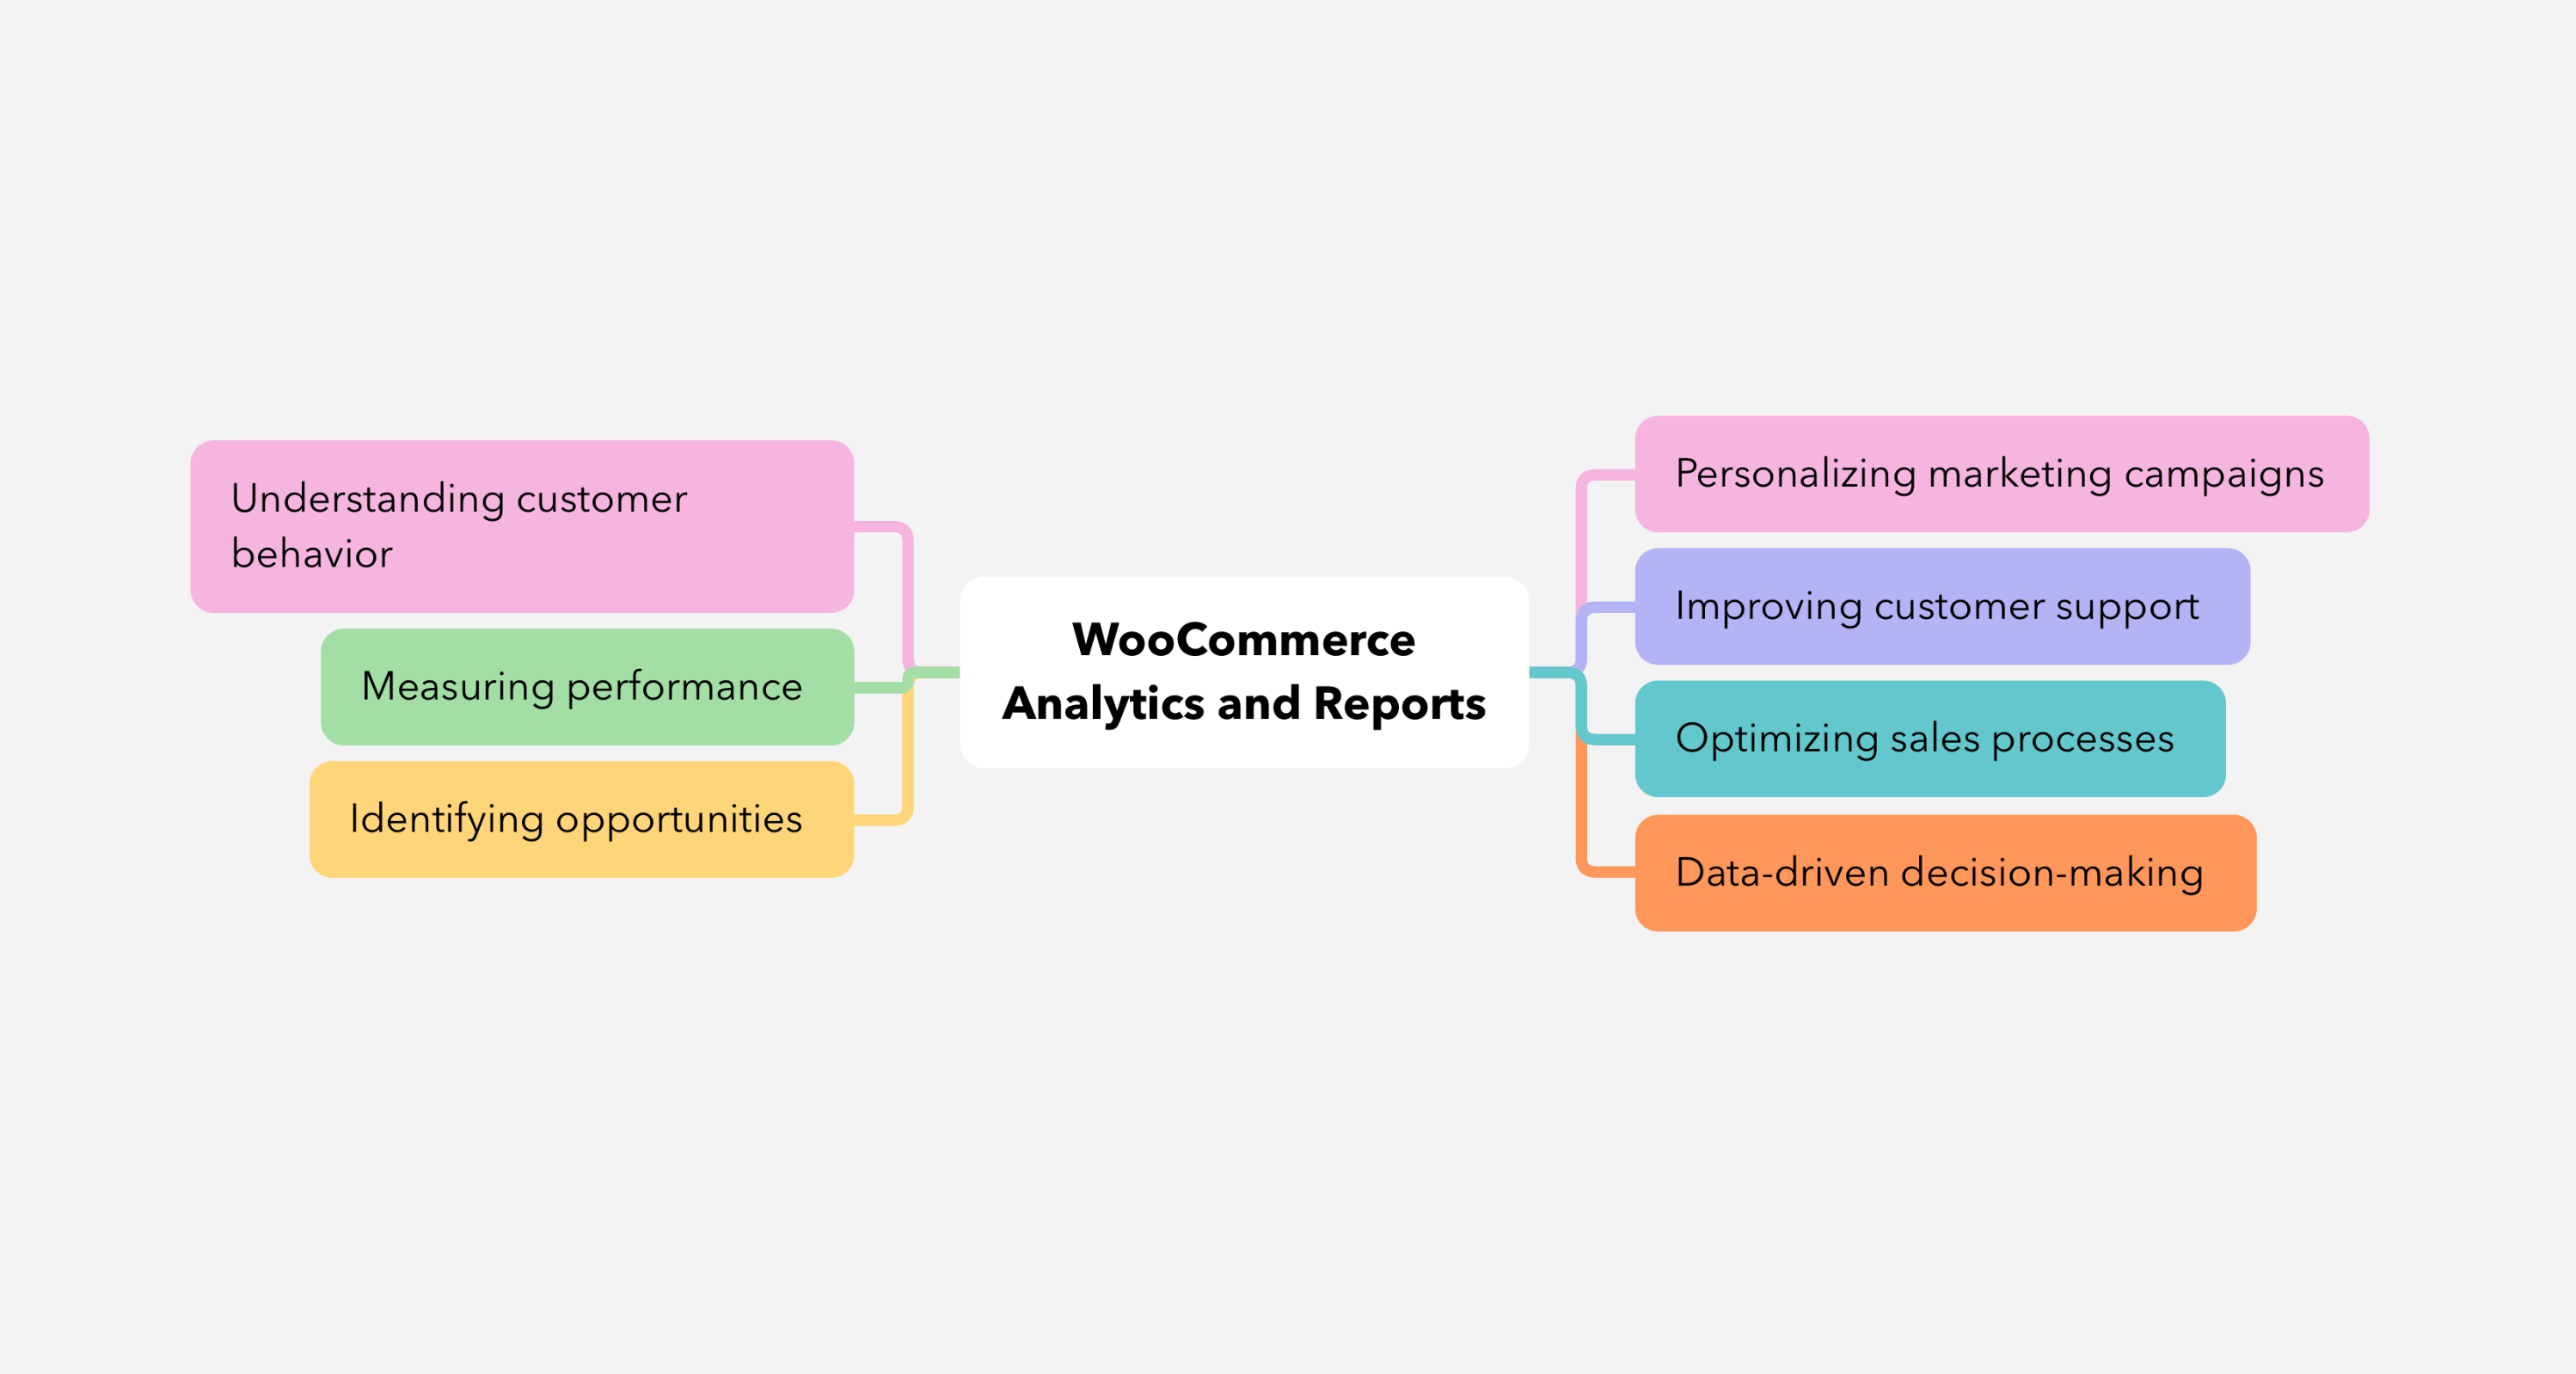 analytics and reports benefits from woocommerce crm